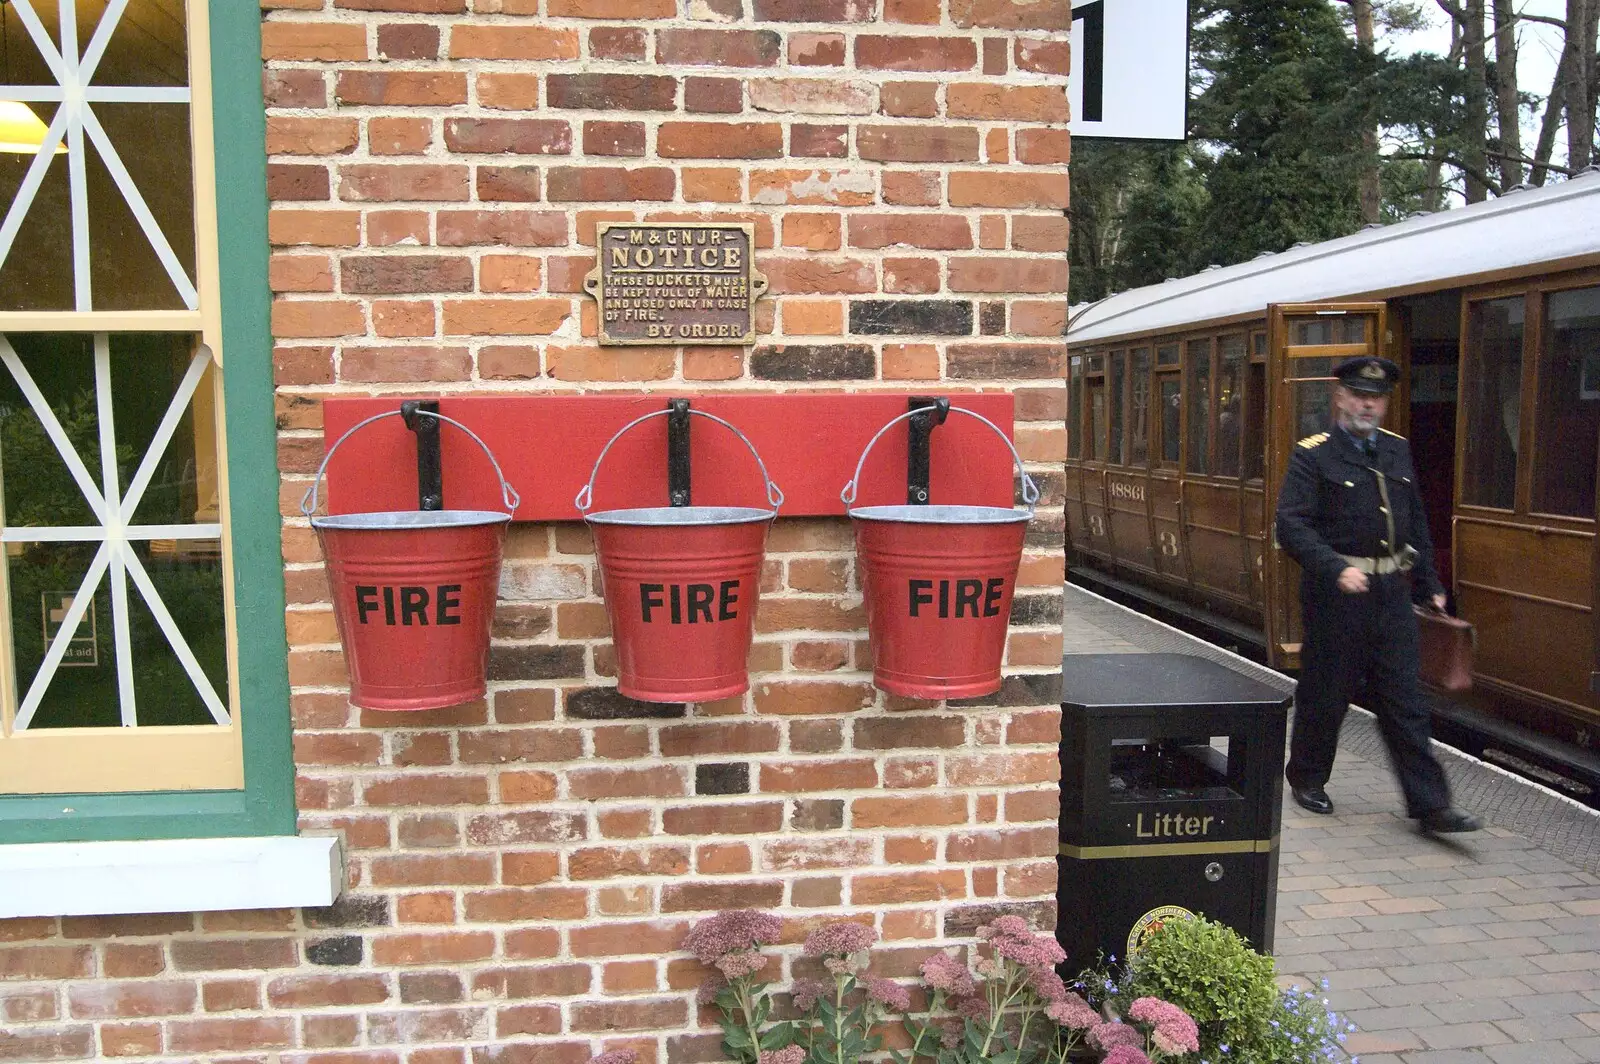 Three red fire buckets, from A 1940s Steam Weekend, Holt and Sheringham, Norfolk - 18th September 2010